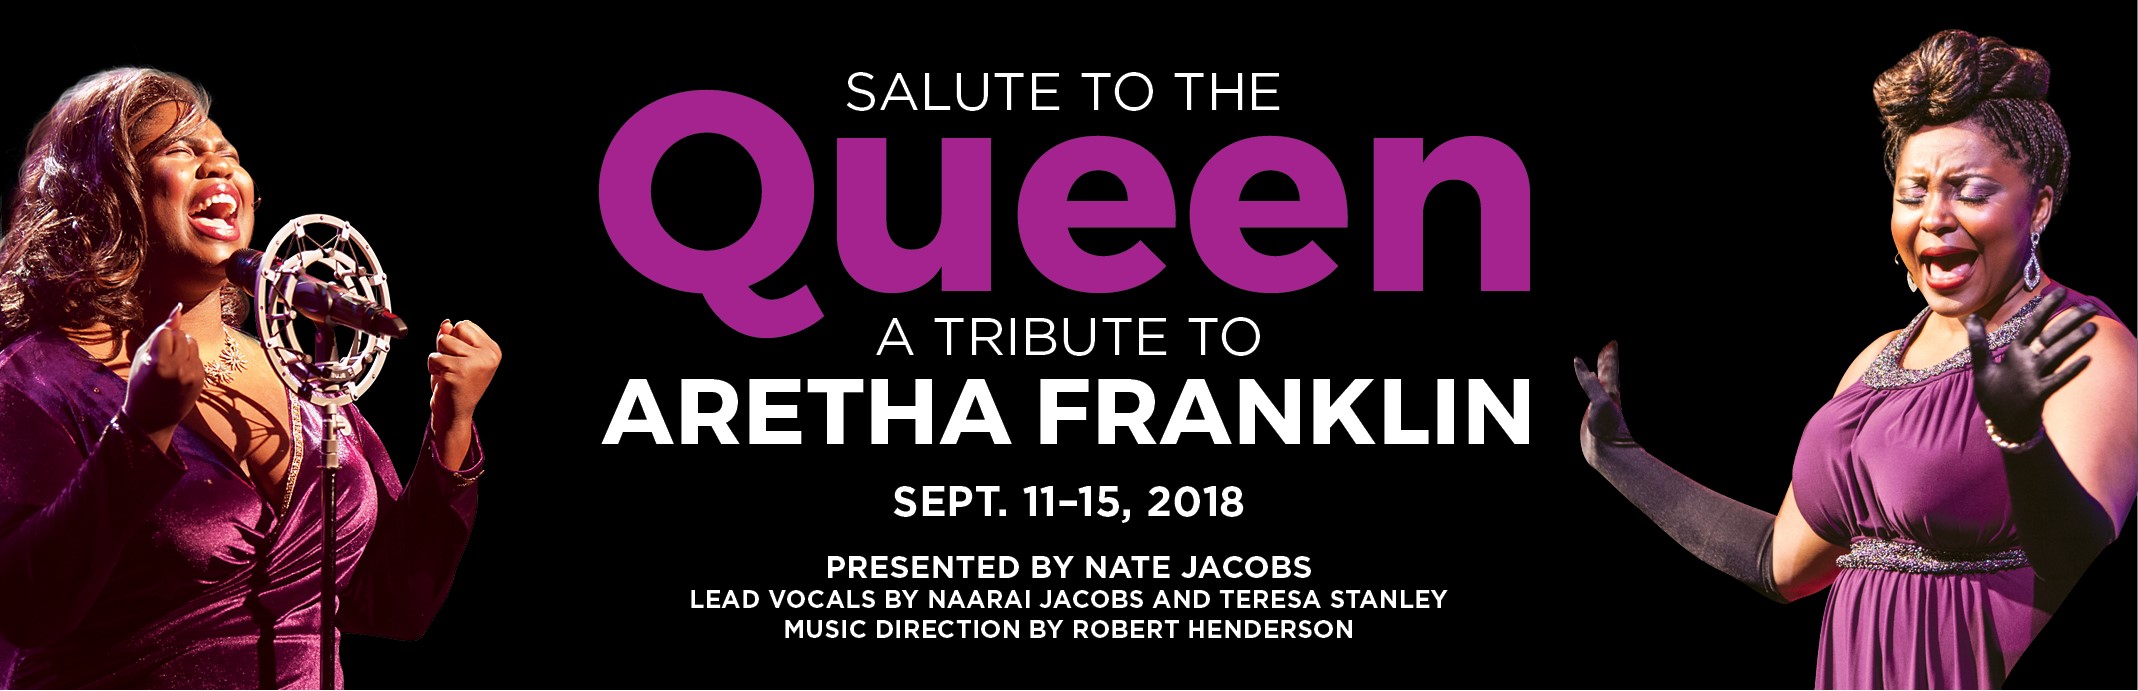 Salute to the Queen: A Tribute to Aretha Franklin